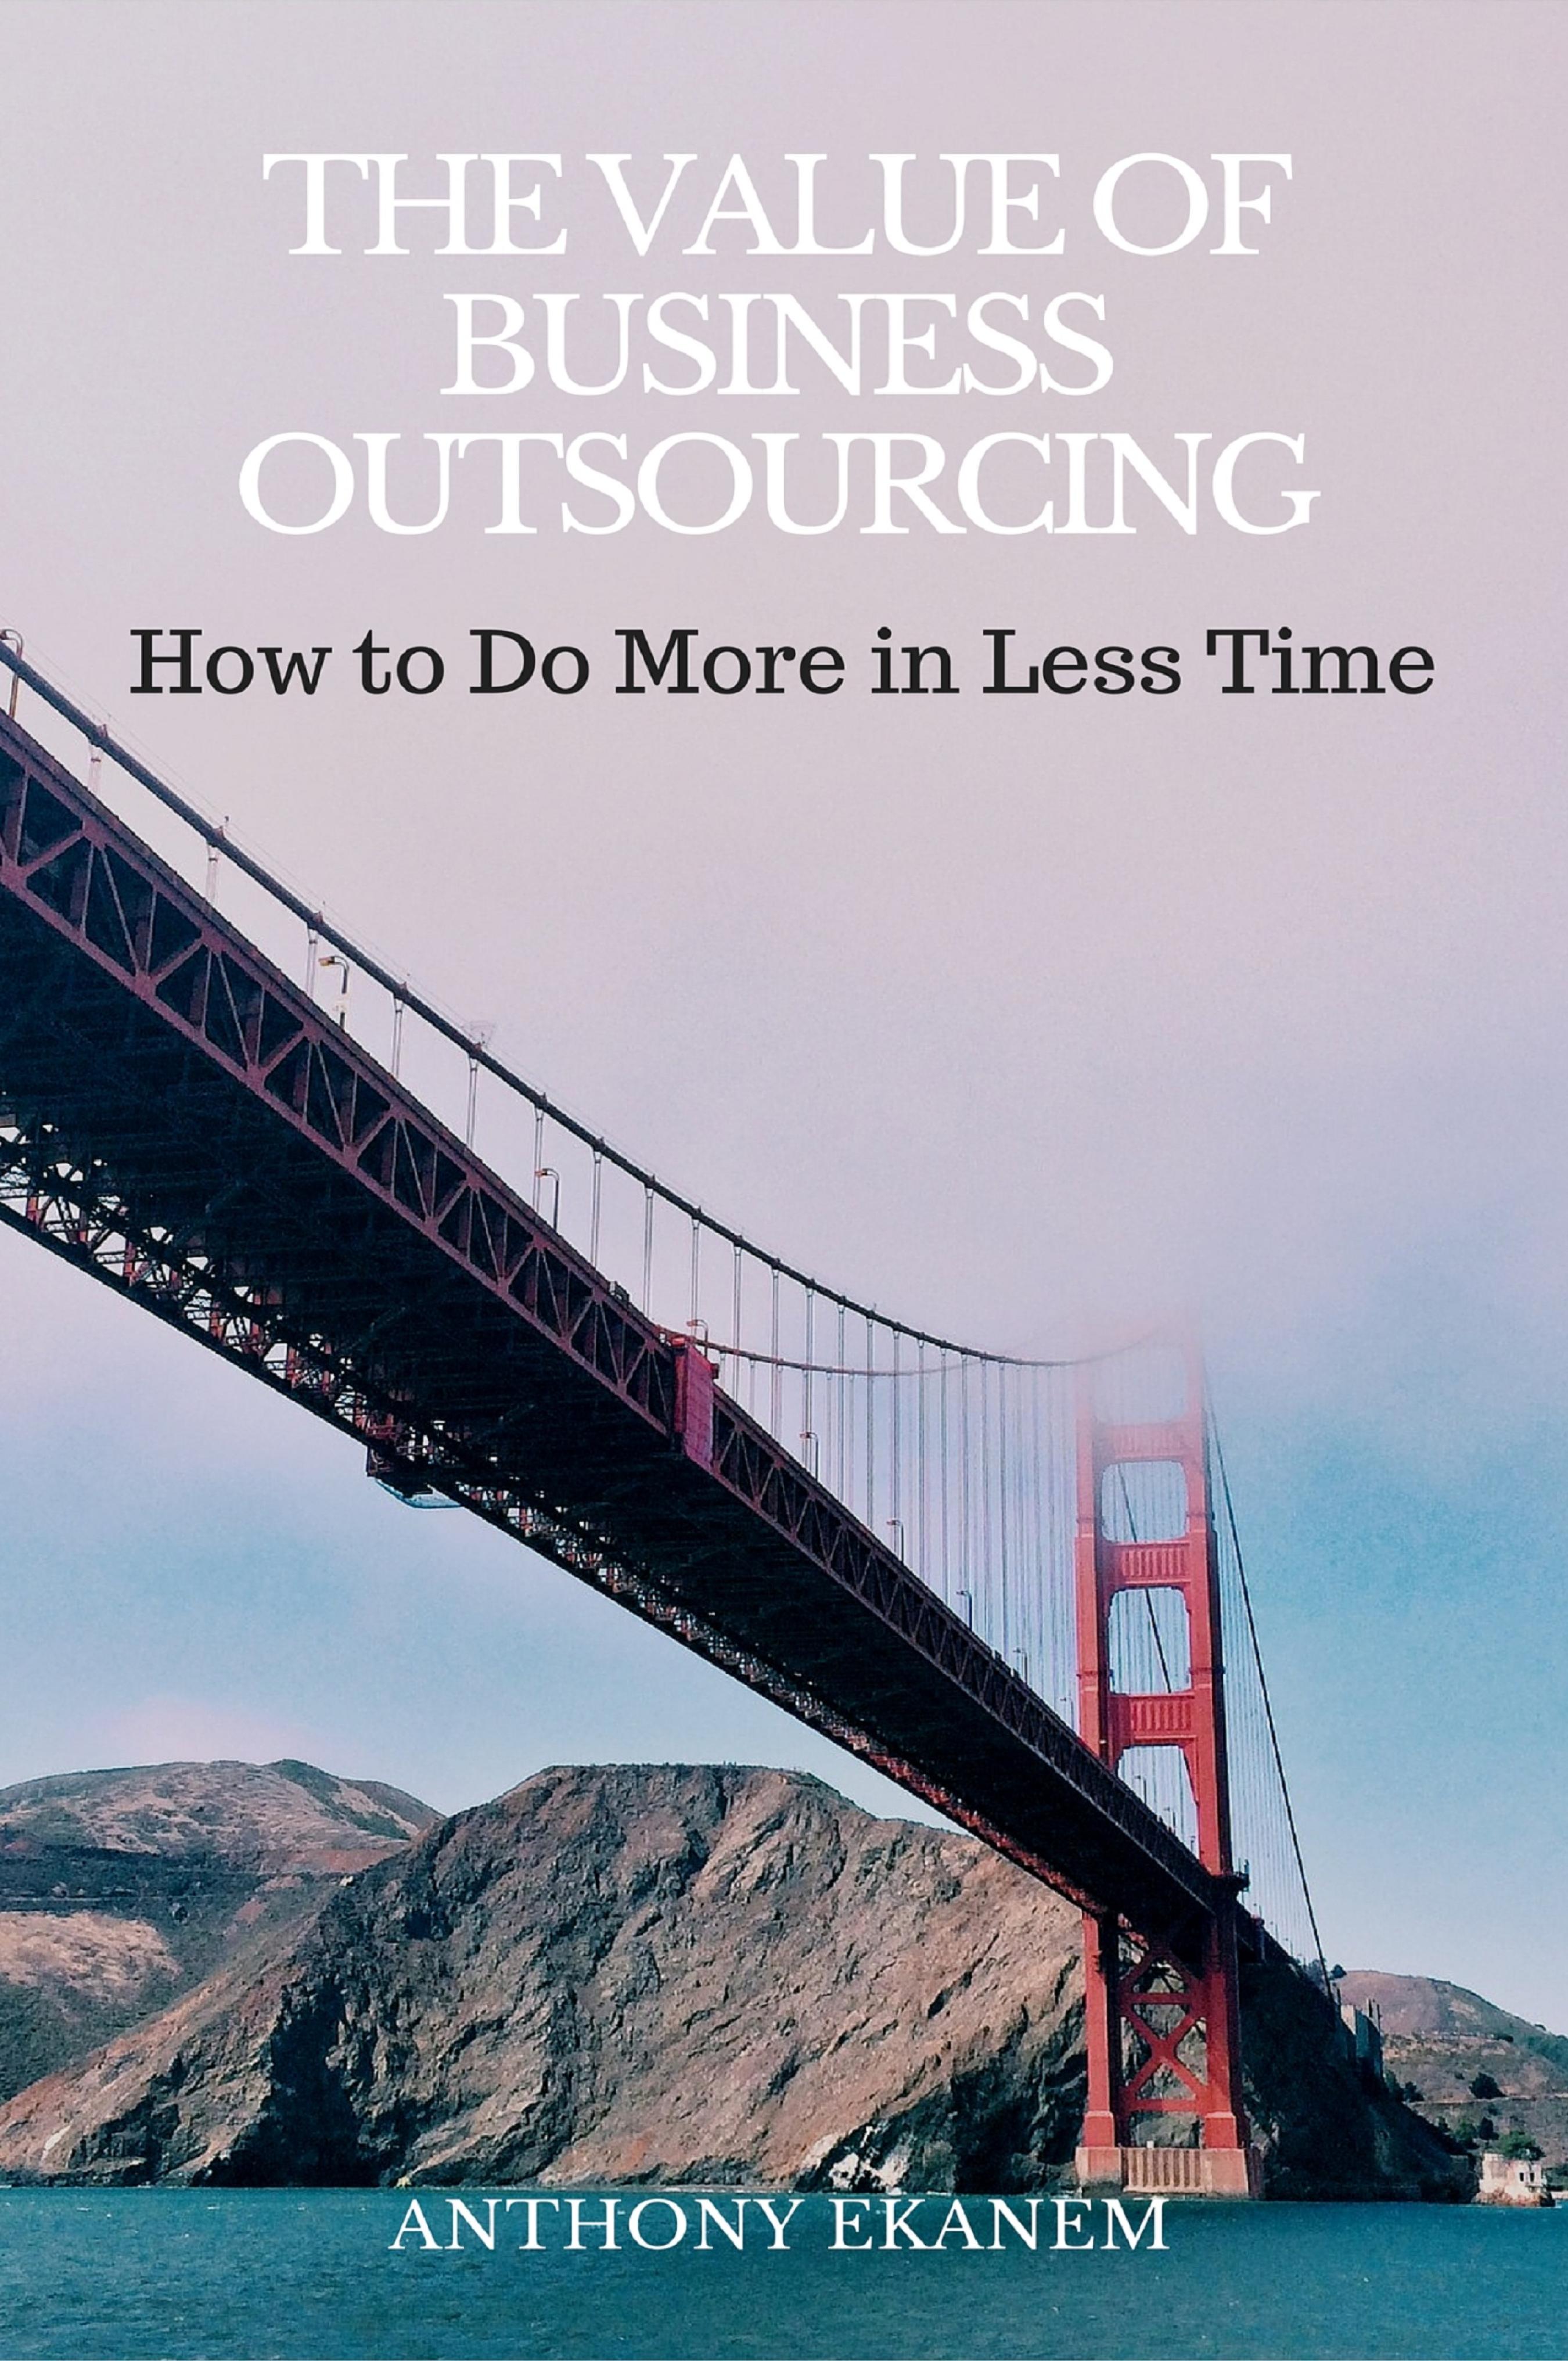 The Value of Business Outsourcing